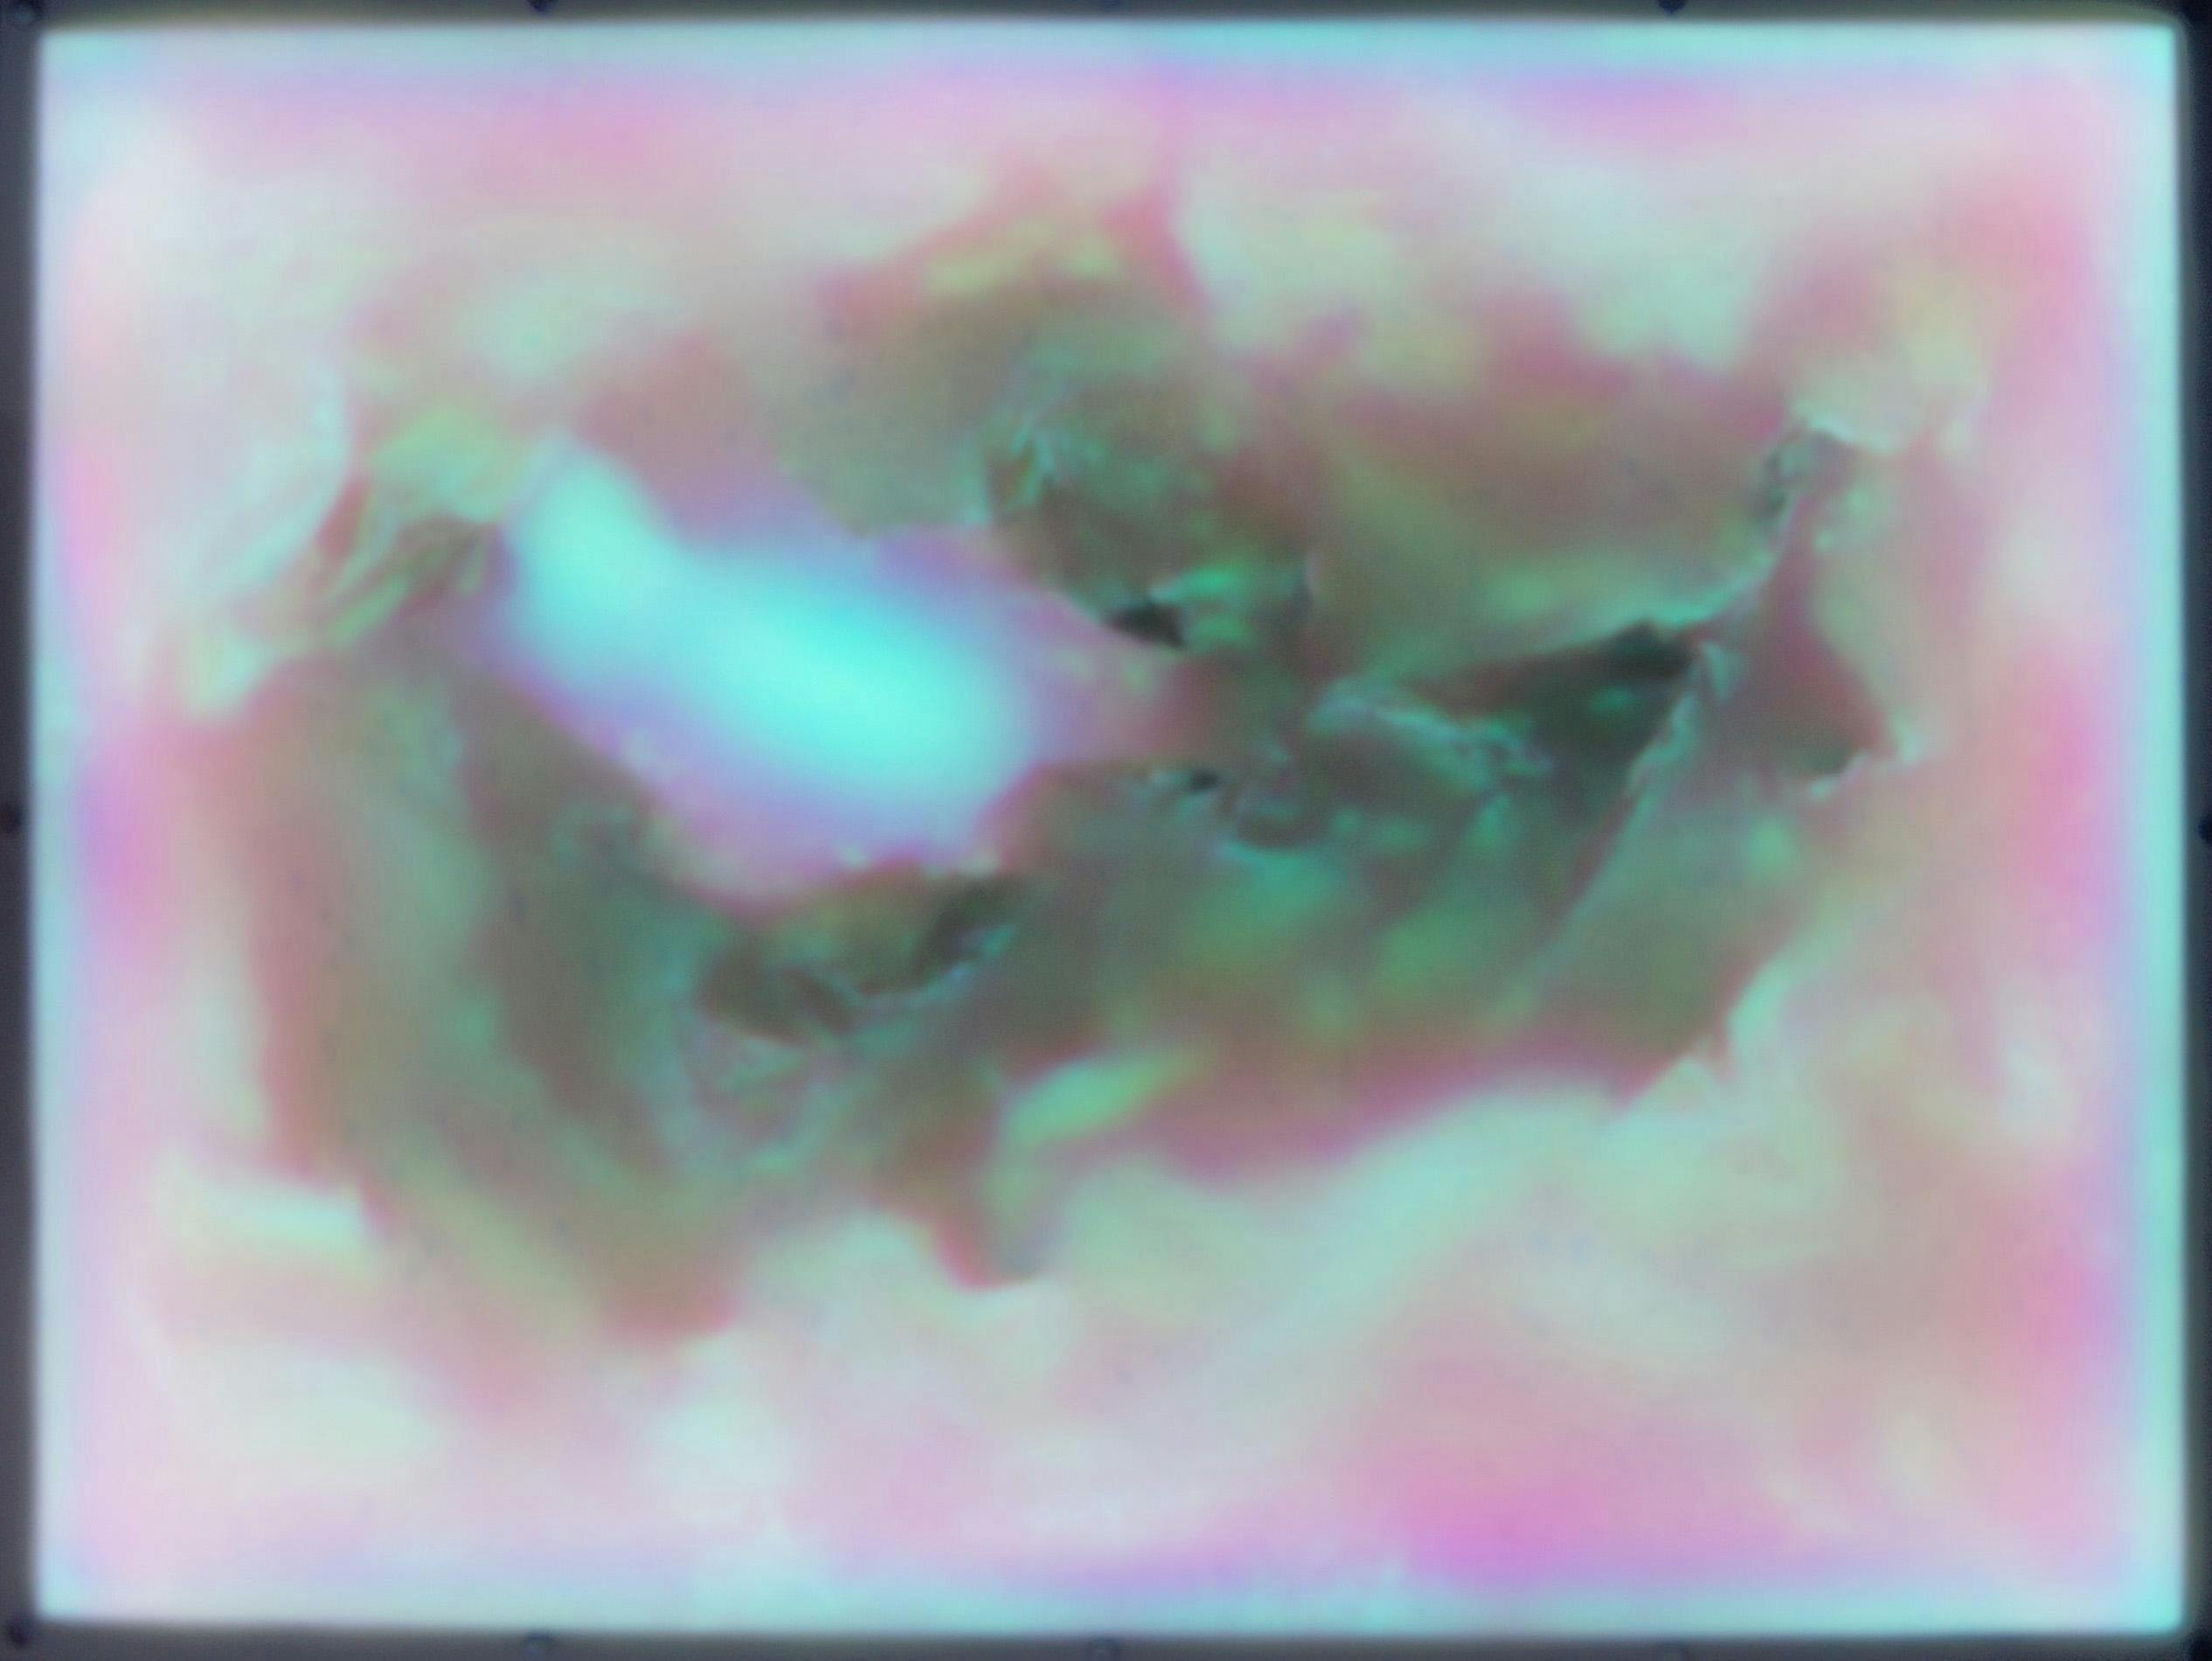 A grainy, iridescent, abstracted tunnel, rendered in peaches and pinks around the perimeter and greens and yellows deeper within its interior. The chasm-like form appears both bodily and landscape-like, depicting craggy surfaces that recede into space.